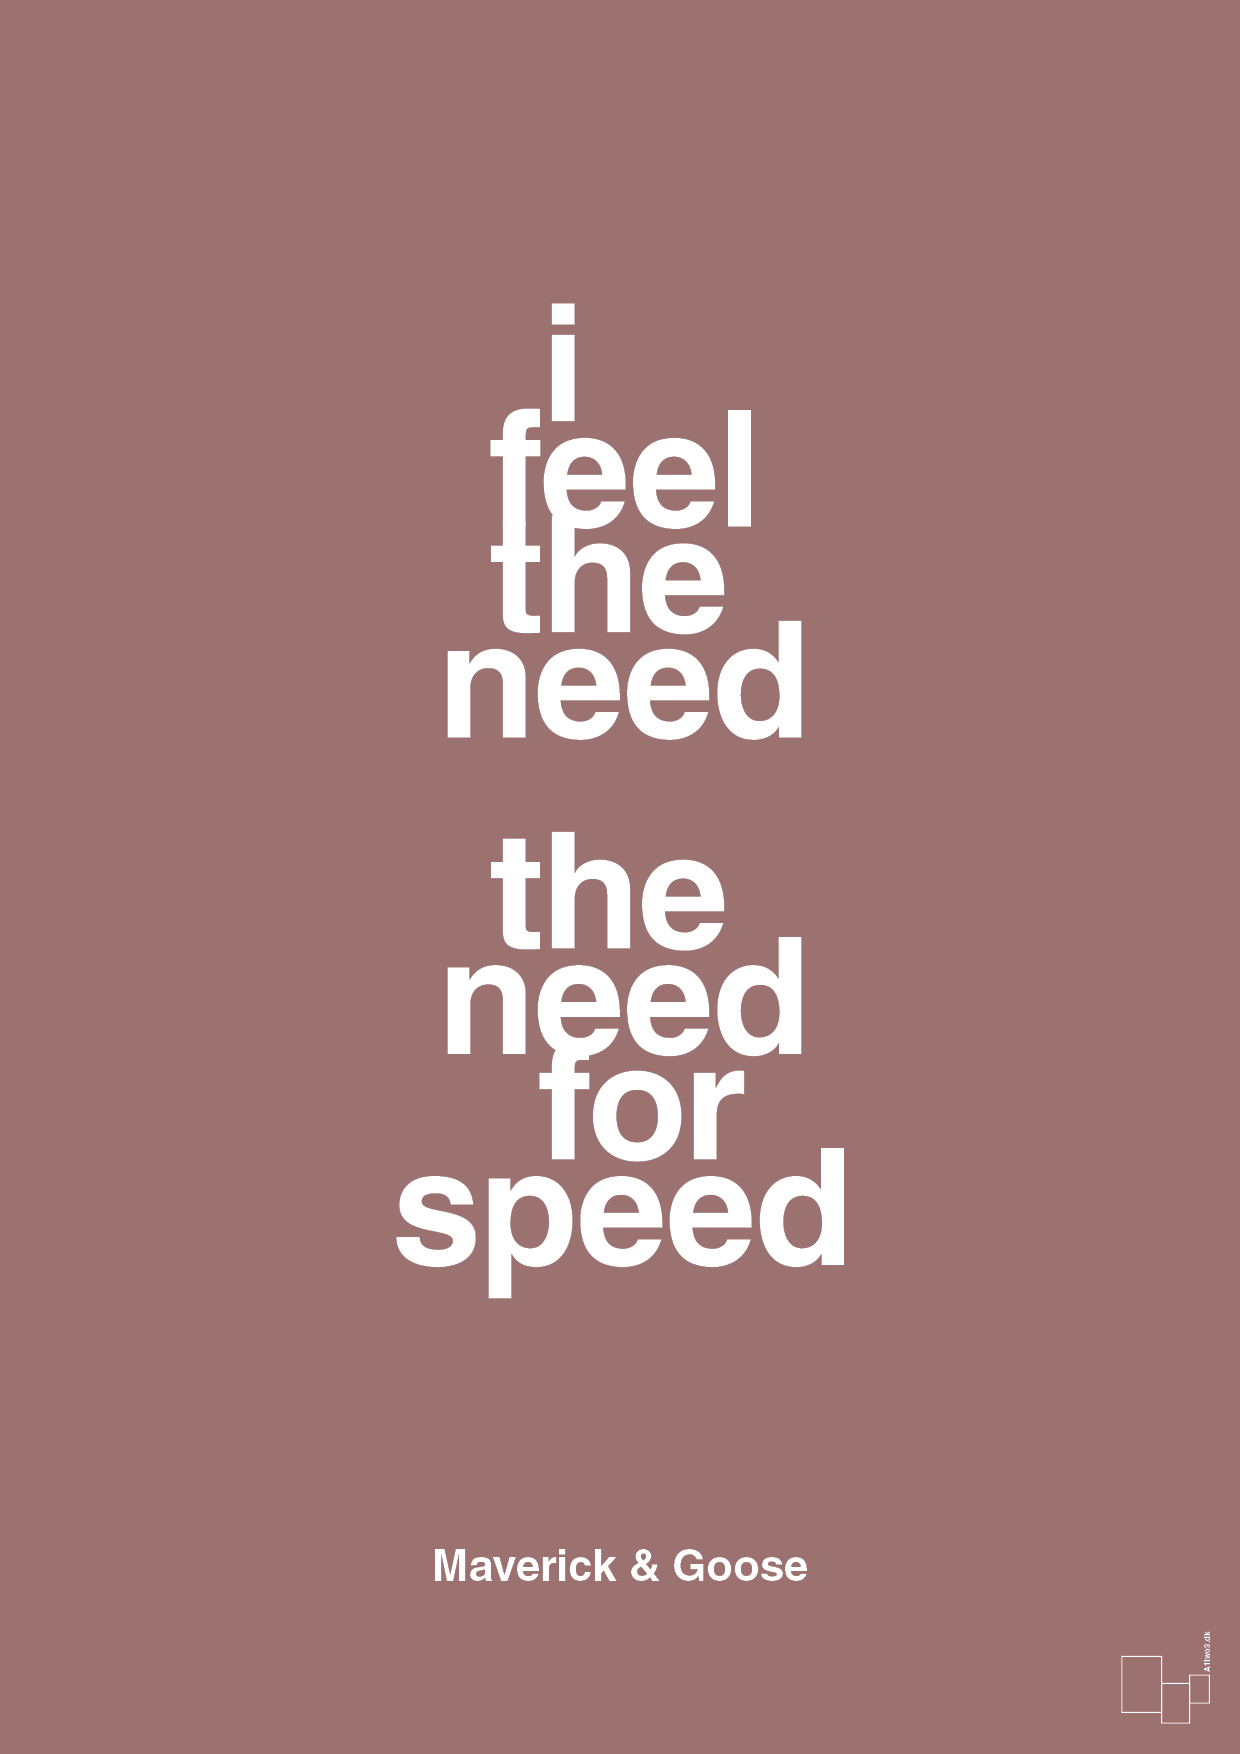 i feel the need the need for speed - Plakat med Citater i Plum